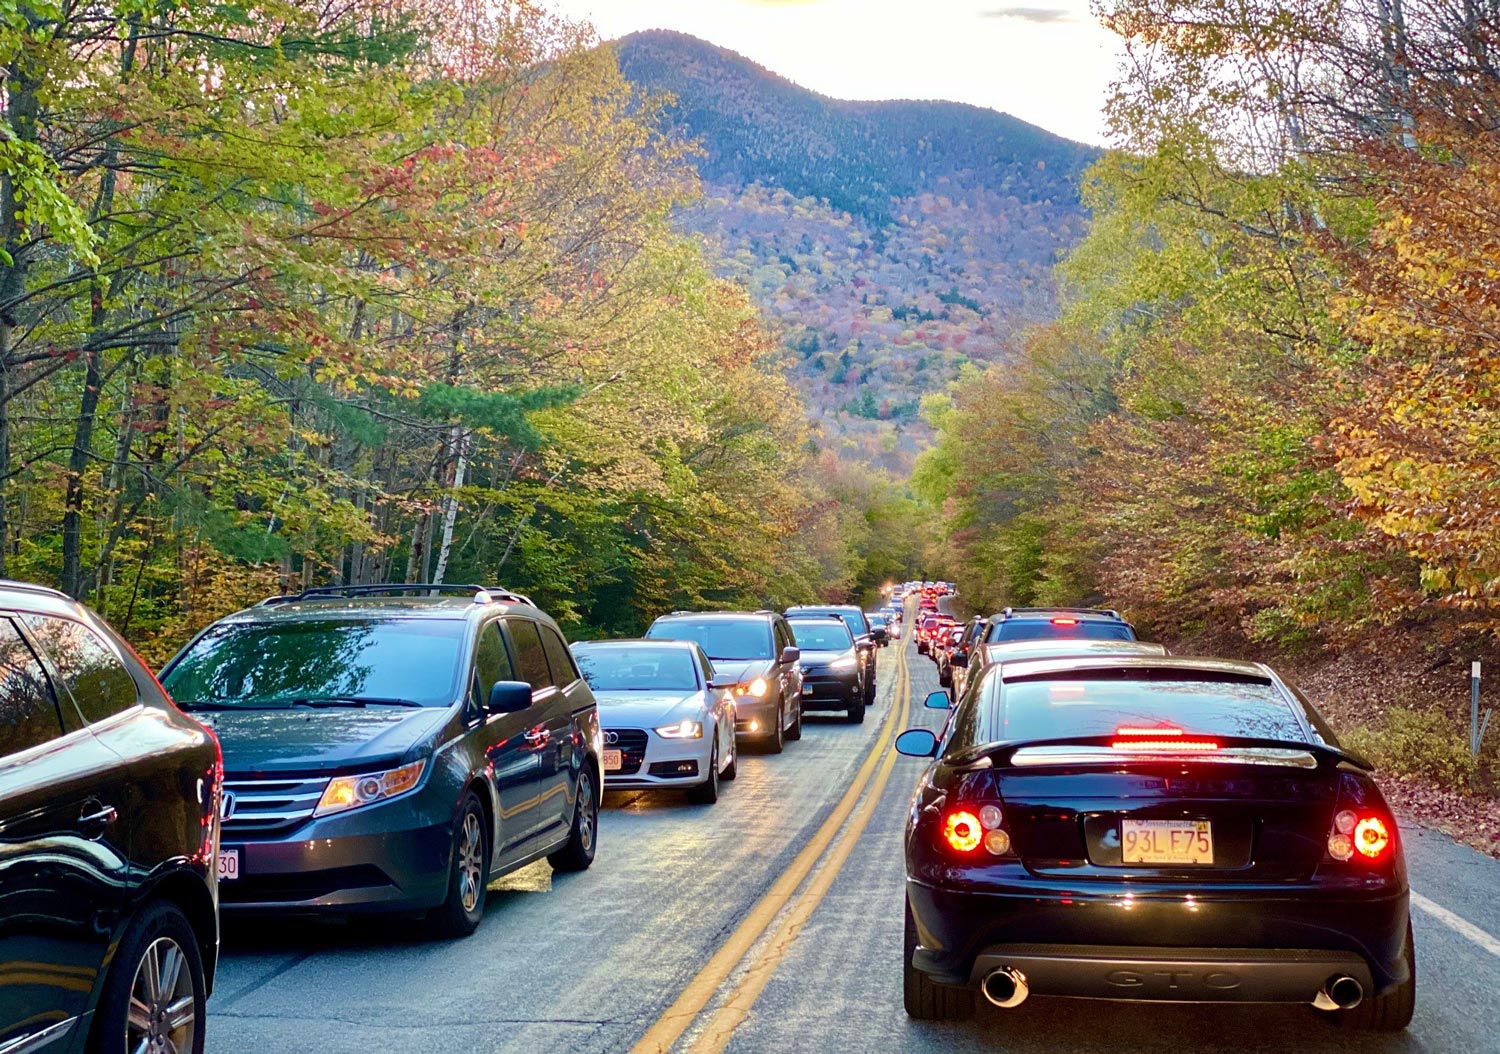 Traffic snarled the scenic Kancamagus Highway in New Hampshire’s White Mountain National Forest in summer of 2020.